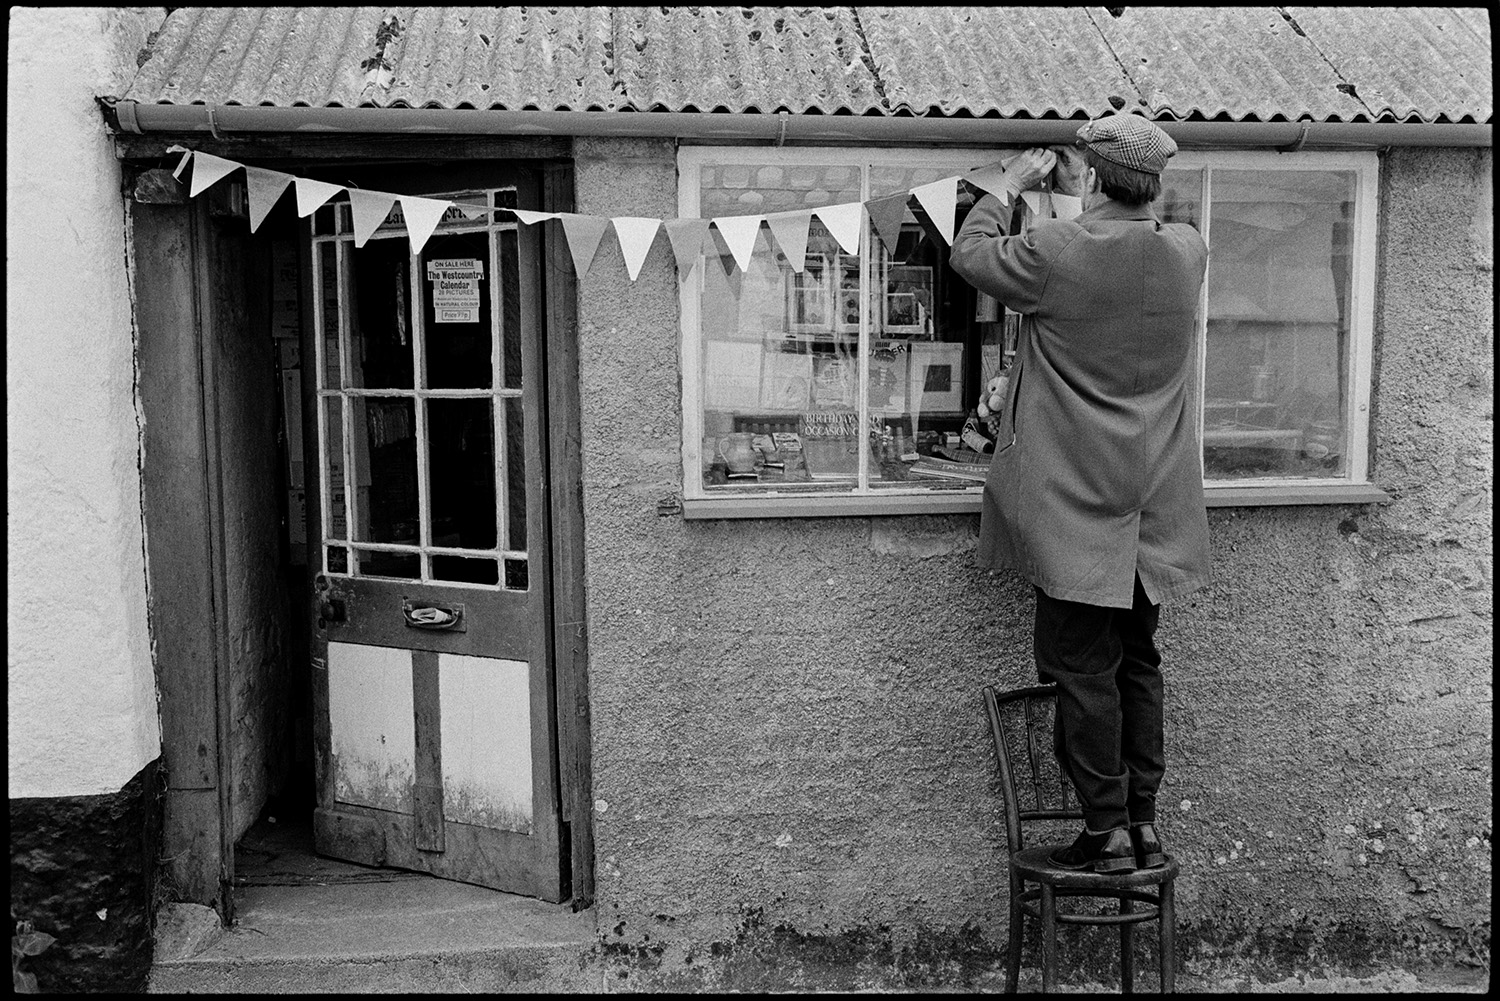 Club Day, man decorating shop with bunting, flags.
[Tim Laing standing on a chair decorating a shopfront with bunting for Club Day at Iddesleigh. Greetings cards are displayed in the shop front window and the shop roof is made from corrugated iron.]